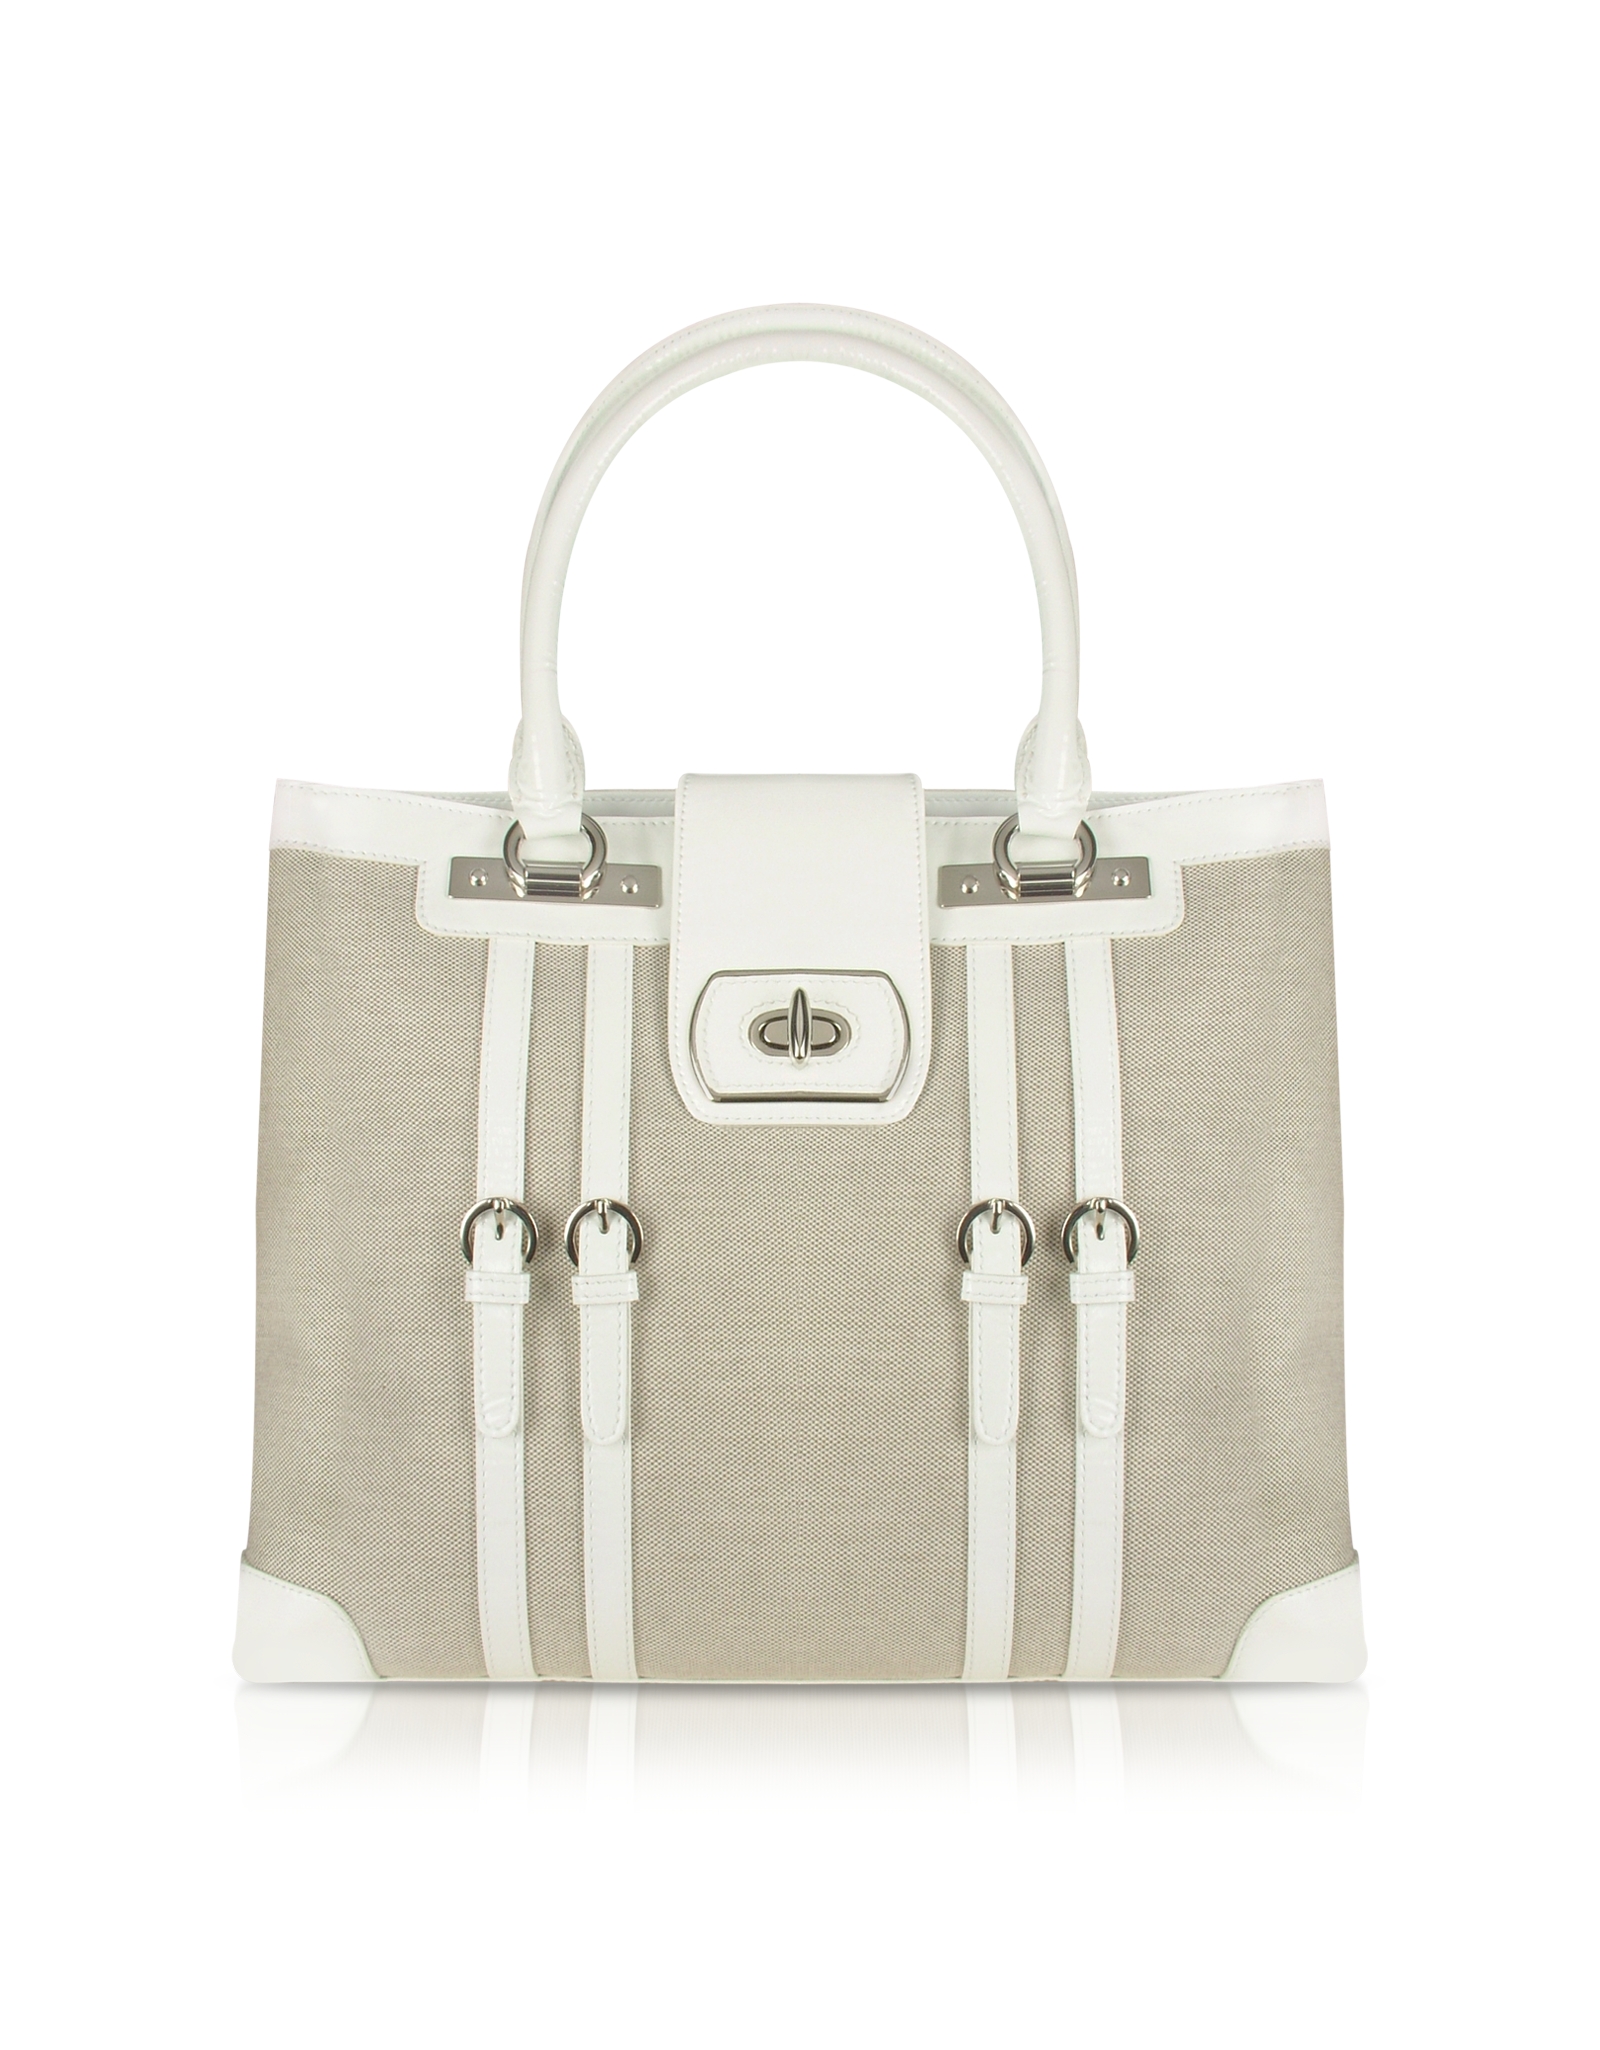 Lyst - Buti White Patent Leather And Canvas Tote Bag in Natural